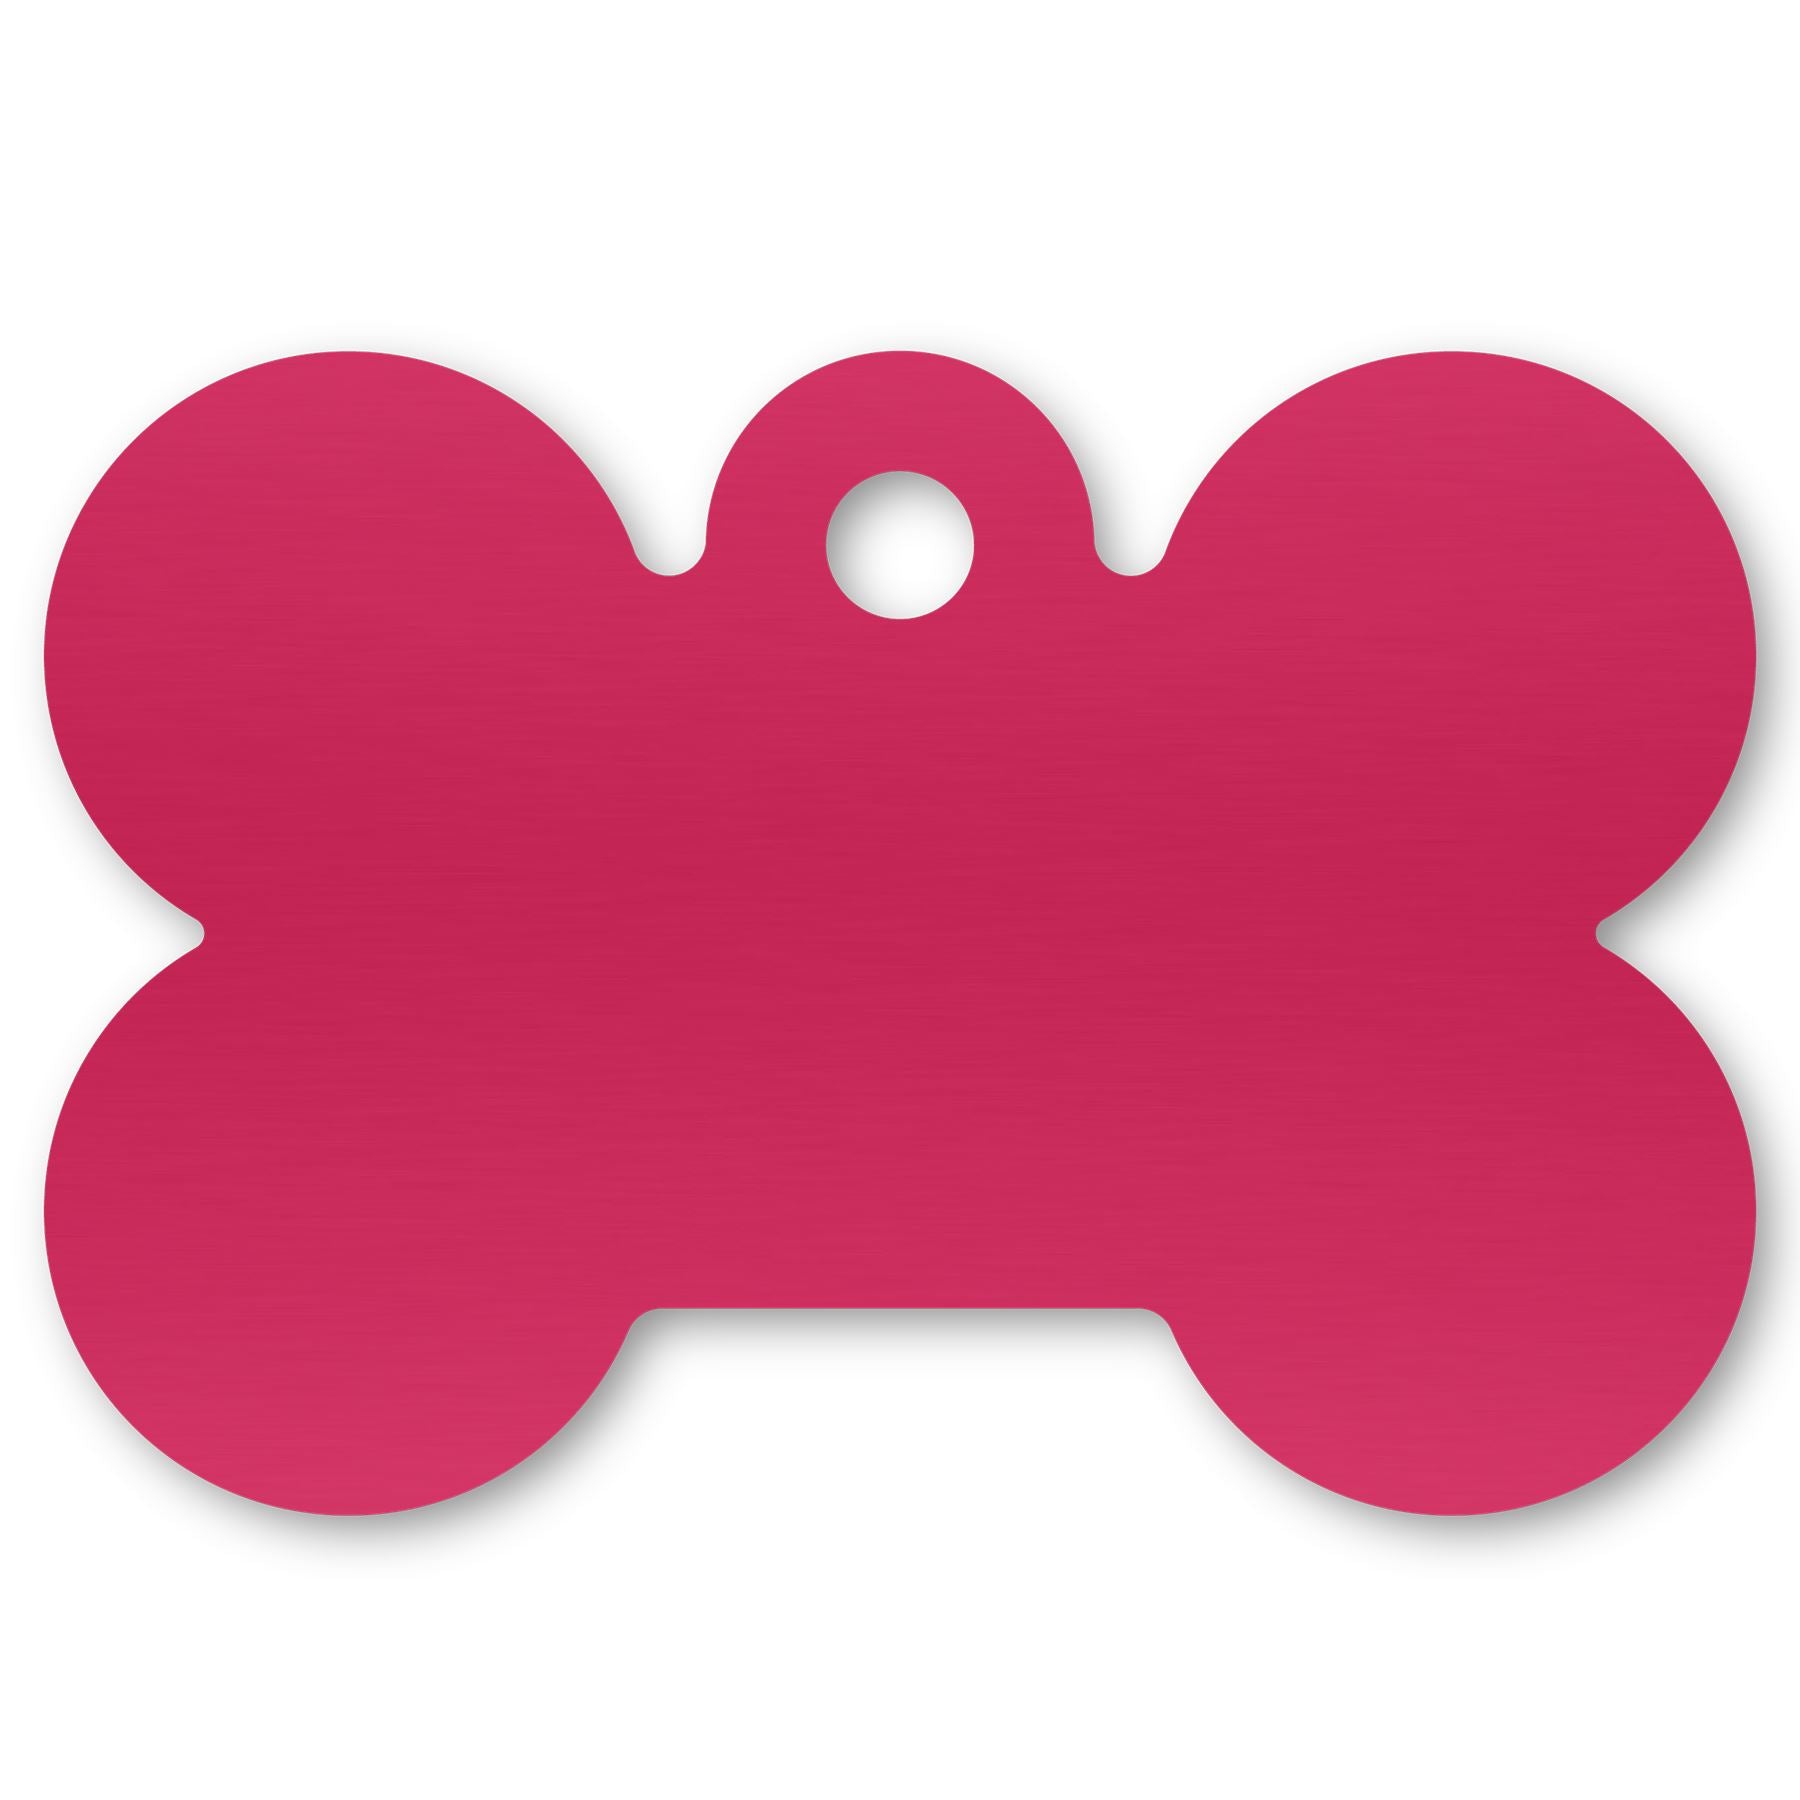 Anodized Aluminum Dog Bone Shaped Tags, 7/8" x 1-3/16" with 3/32" Hole, Laser Engraved Metal Tags Craftworks NW Pink 